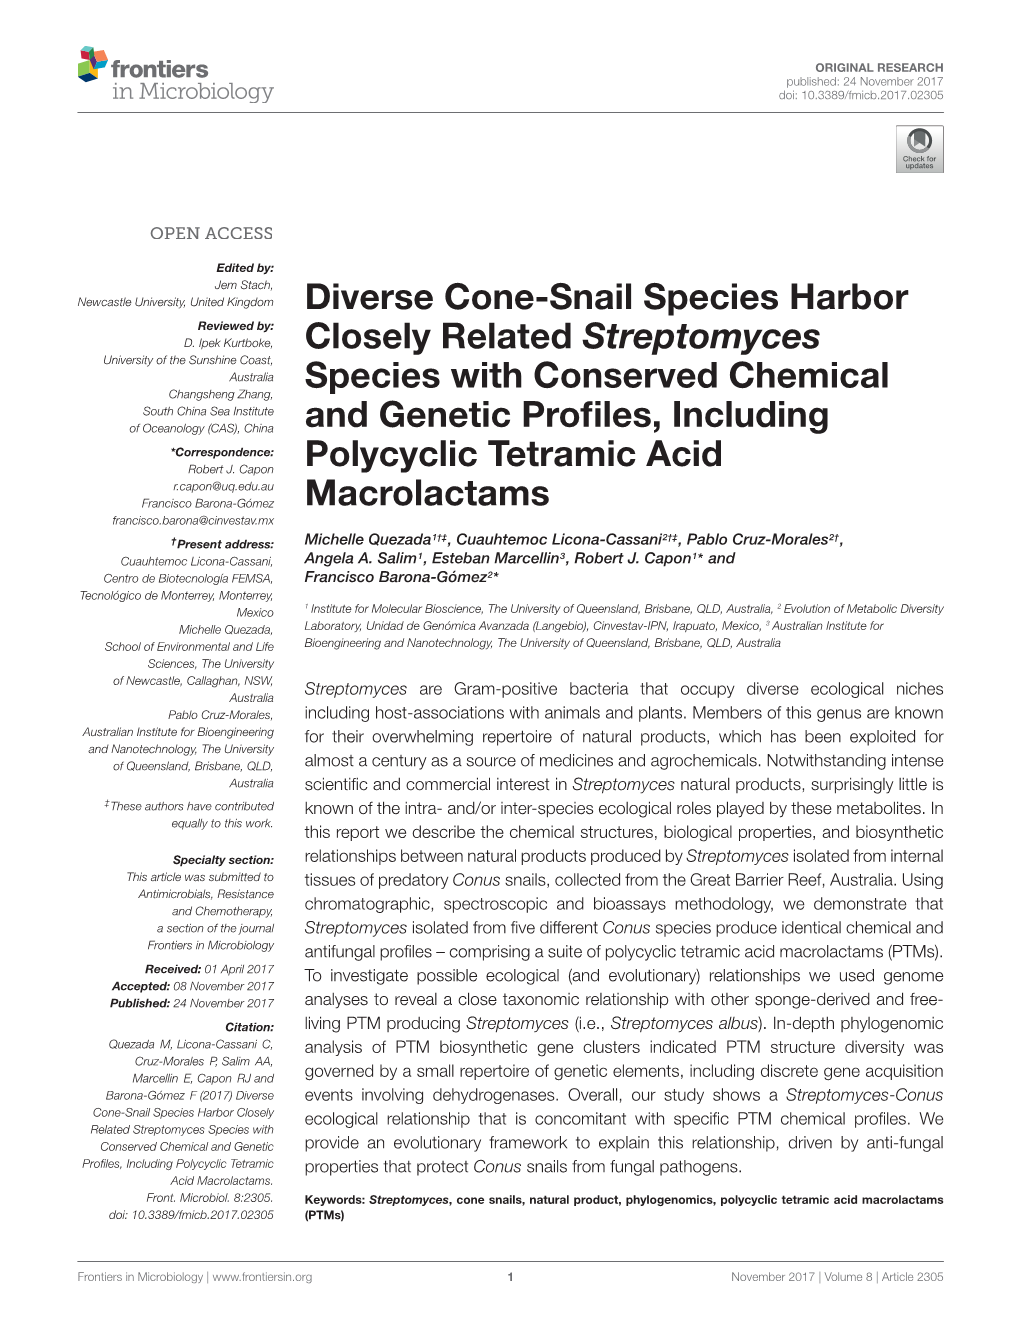 Diverse Cone-Snail Species Harbor Closely Related Streptomyces